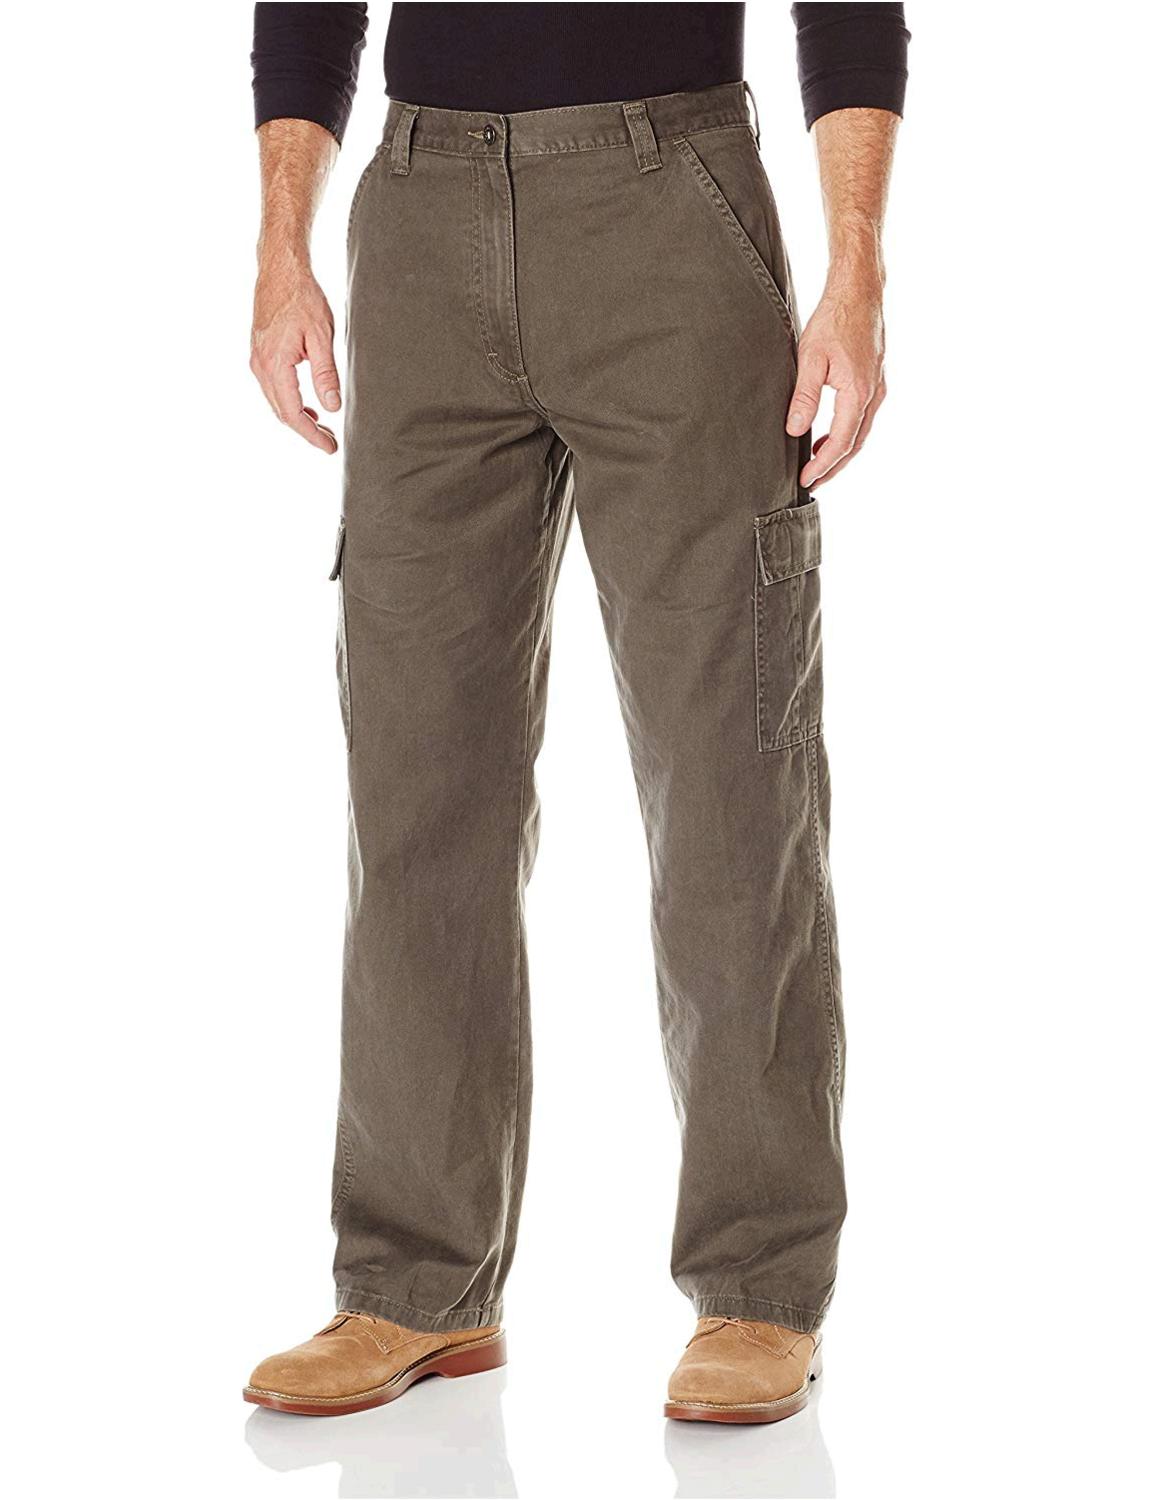 Wrangler Authentics Men's Classic Twill Relaxed Fit, Olive Drab, Size ...